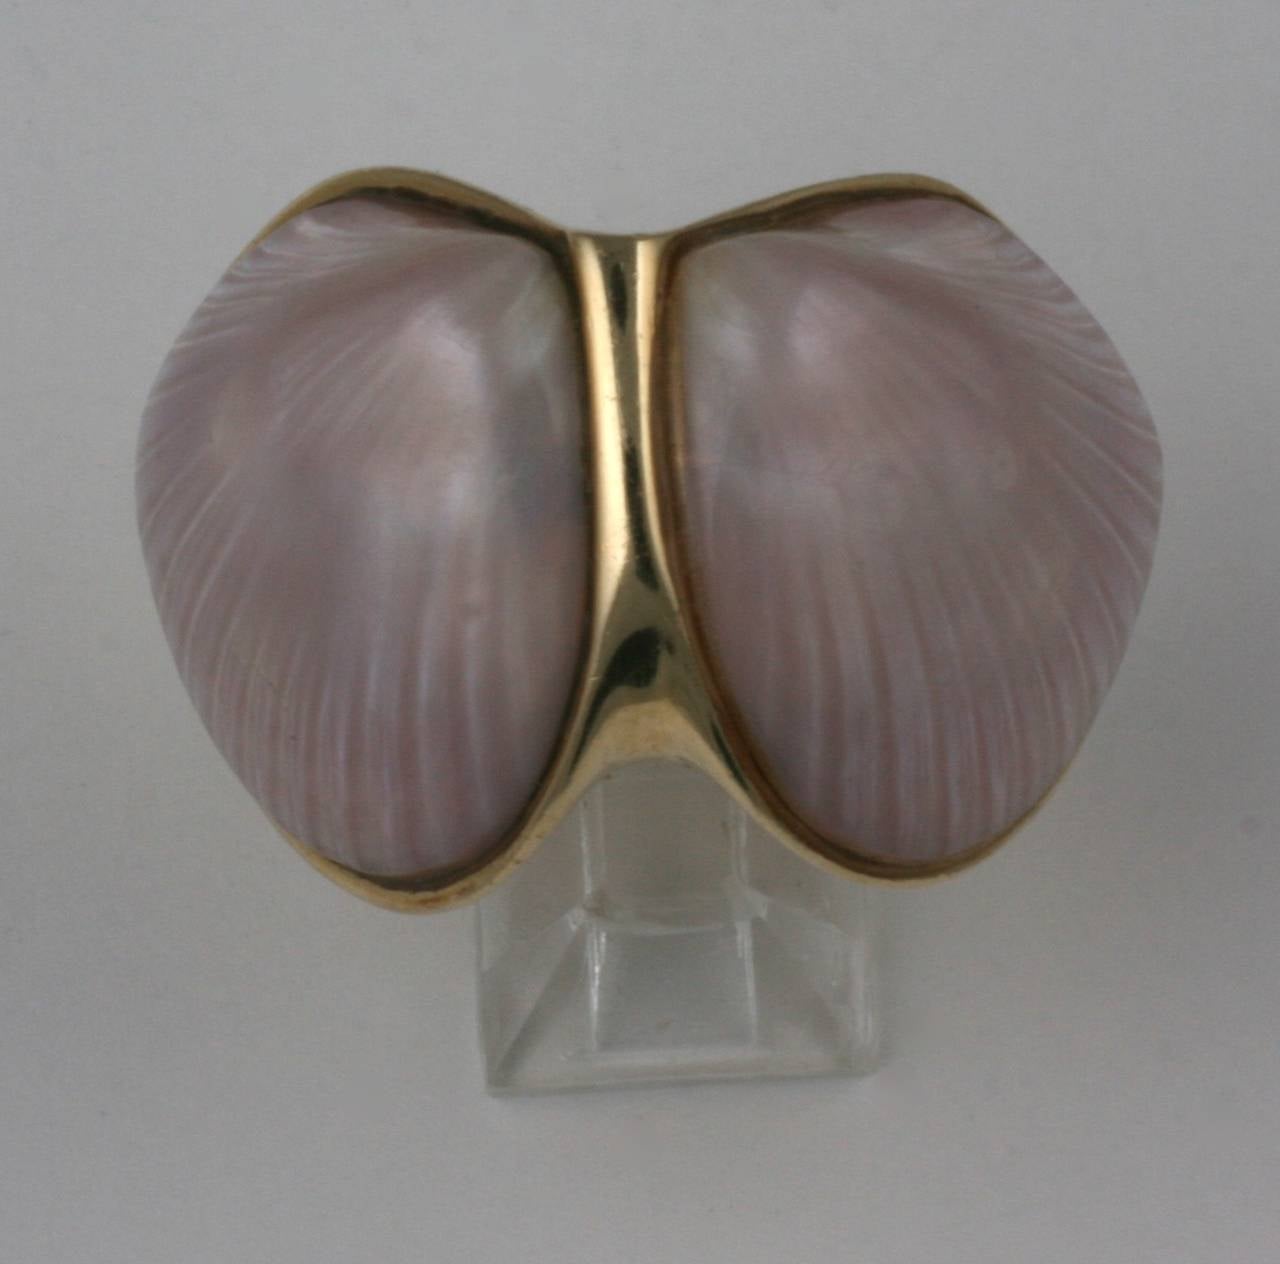 Elegant and formidable oversized ring by Marguerite Stix circa 1965, named The Margaretacea, one of her most recognized and popular designs.
Exotic clam shells with a pinky lilac iridescence are the "stones" used for this ring. An